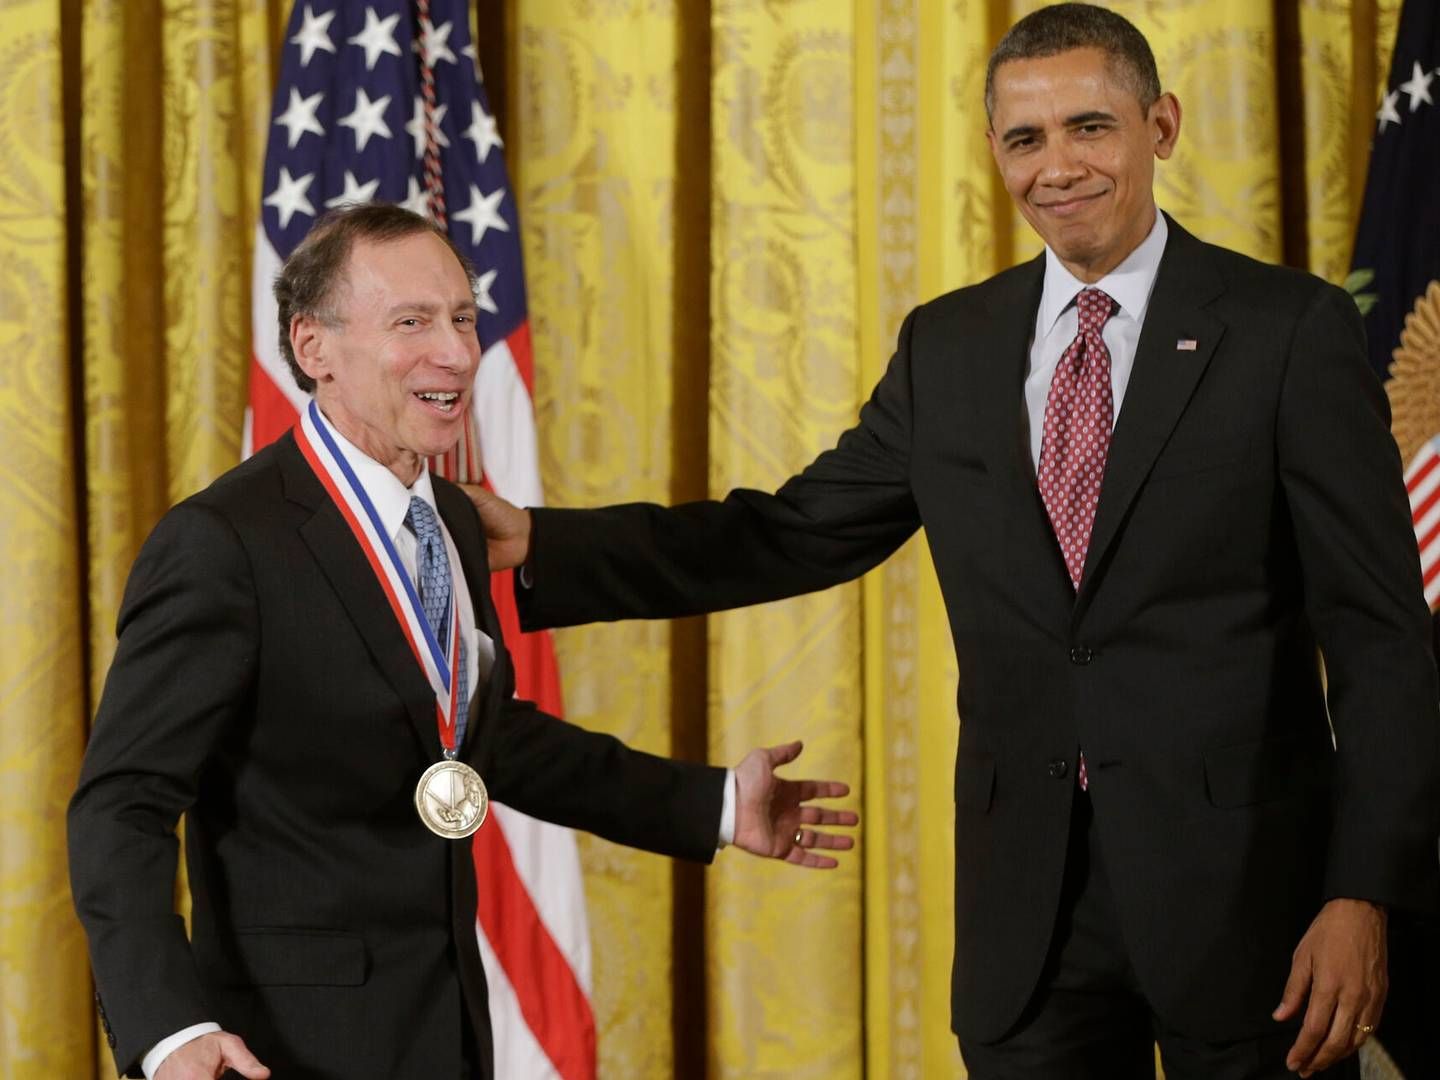 Robert Langer has received several honorary awards in his career. Here, he is pictured in 2013, when then US President Barack Obama presented him with the National Medal of Technology and Innovation. | Photo: Charles Dharapak/AP/Ritzau Scanpix